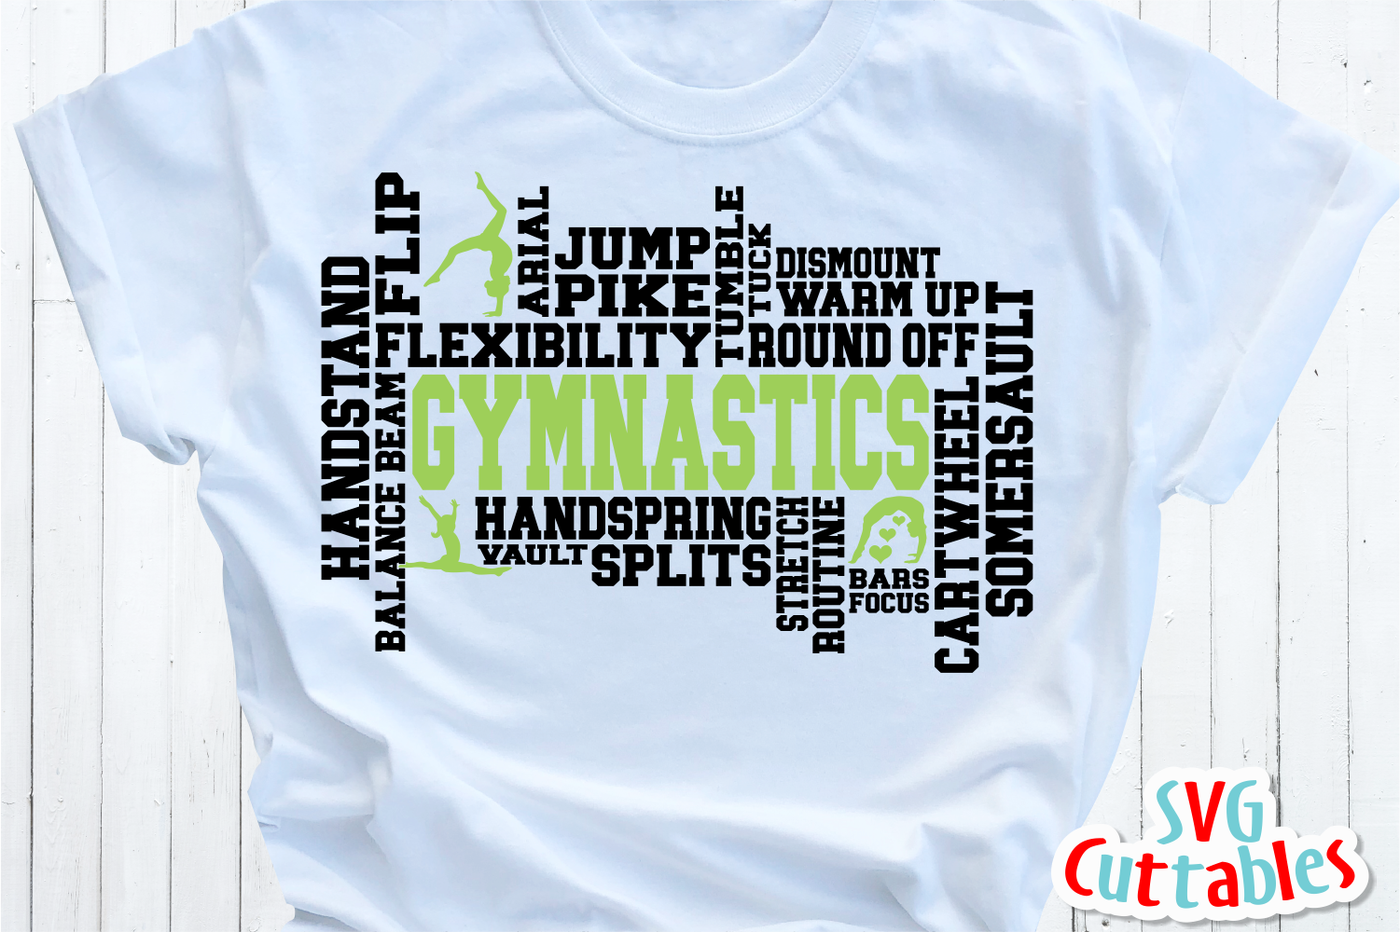 Download Gymnastics Word Art Svg Cut File By Svg Cuttables Thehungryjpeg Com SVG, PNG, EPS, DXF File